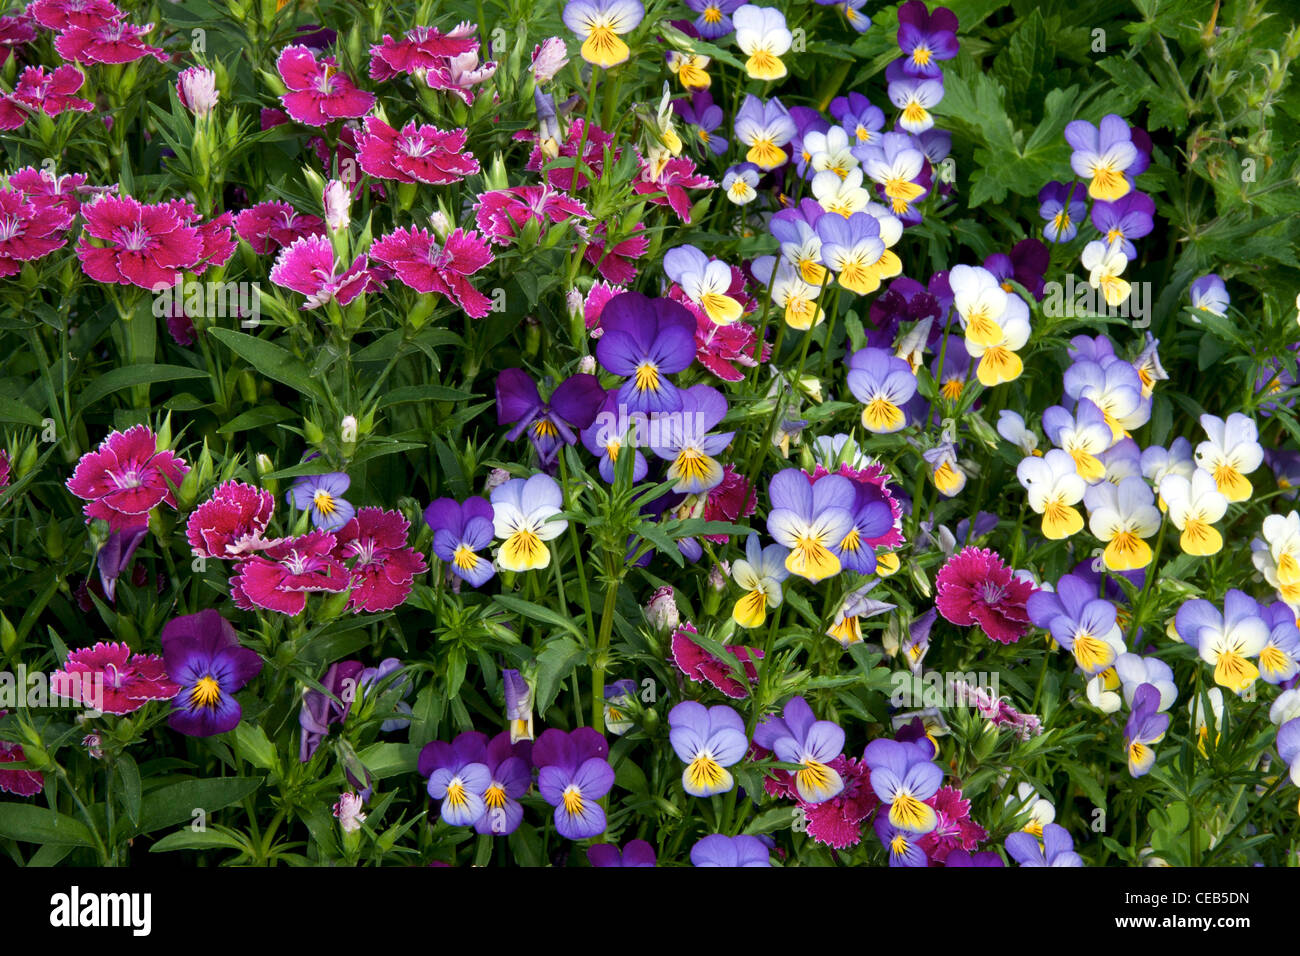 Sweet William and Johnny-jump-up growing together Stock Photo